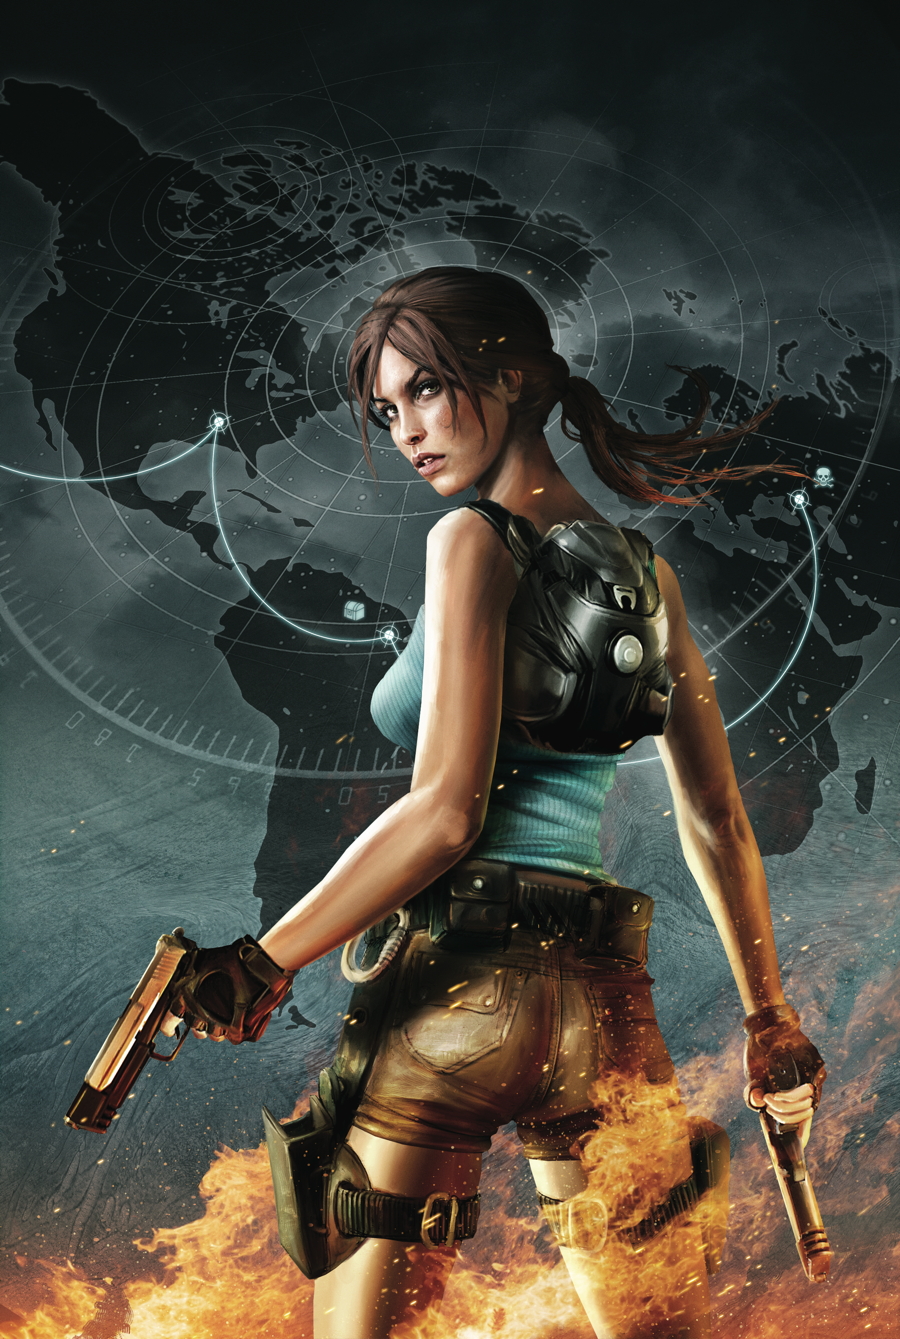 First look at the cover of Lara Croft and the Frozen Omen